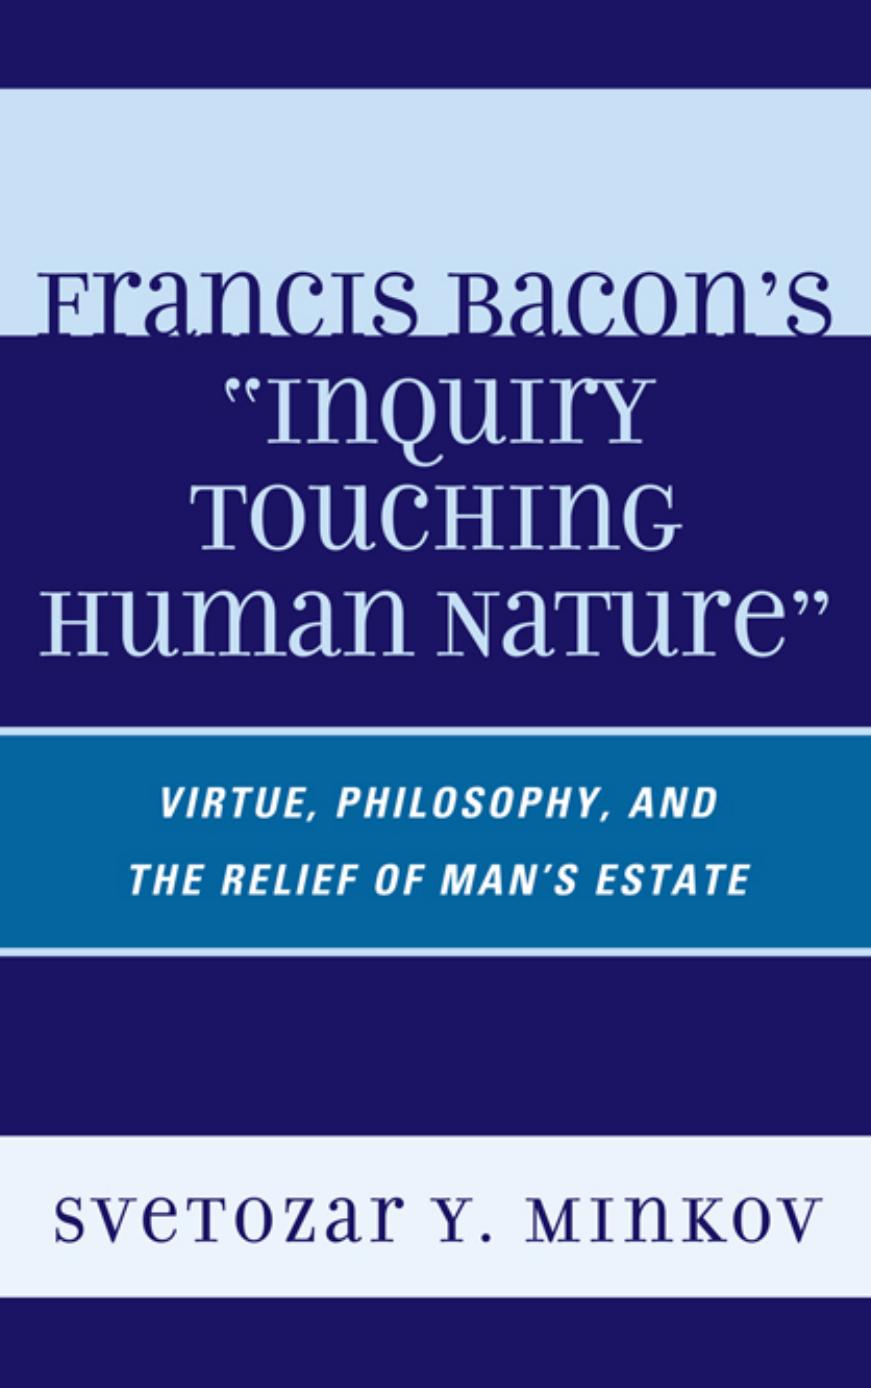 Francis Bacon's "Inquiry Touching Human Nature": Virtue, Philosophy, and the Relief of Man's Estate